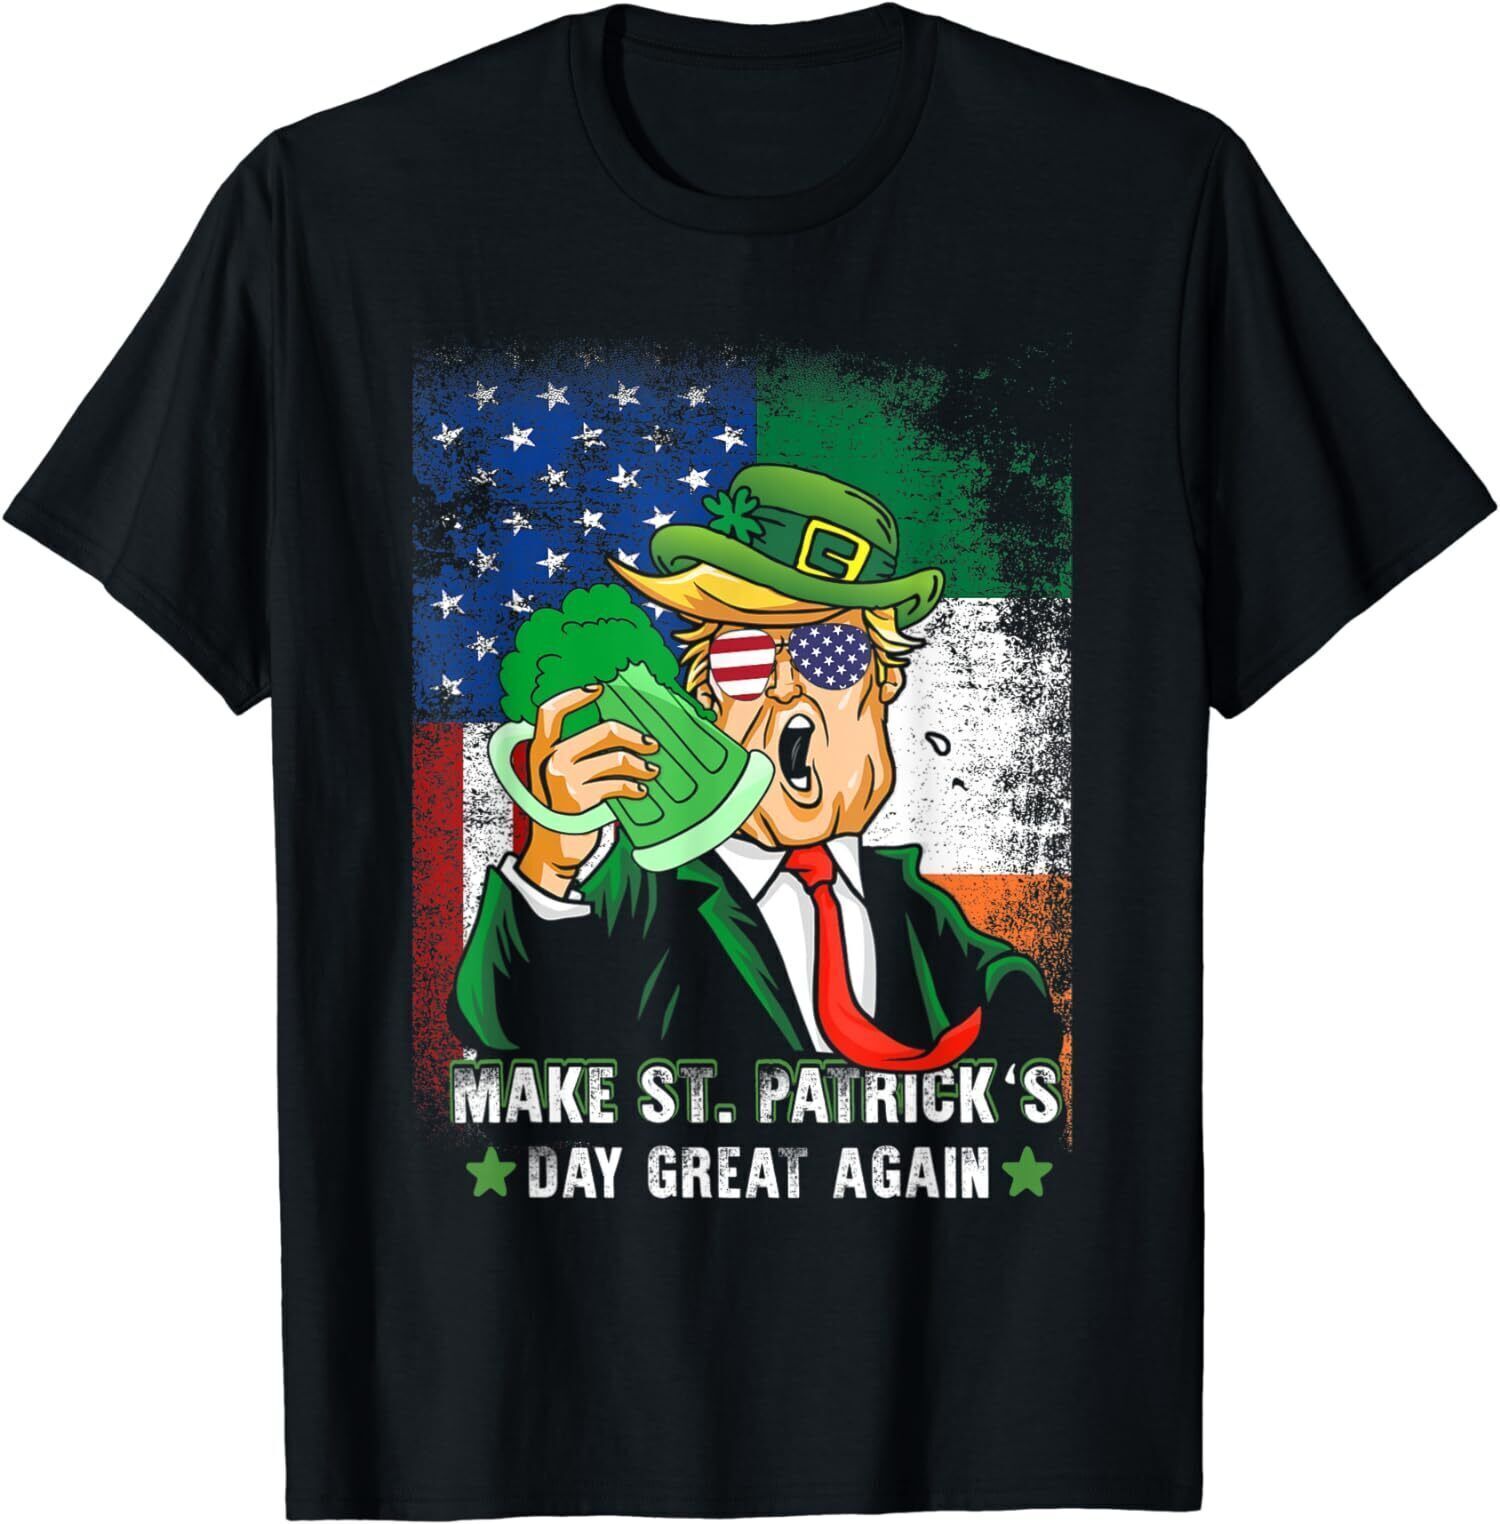 Make St Patrick's Day Great Again Funny Trump T-shirt